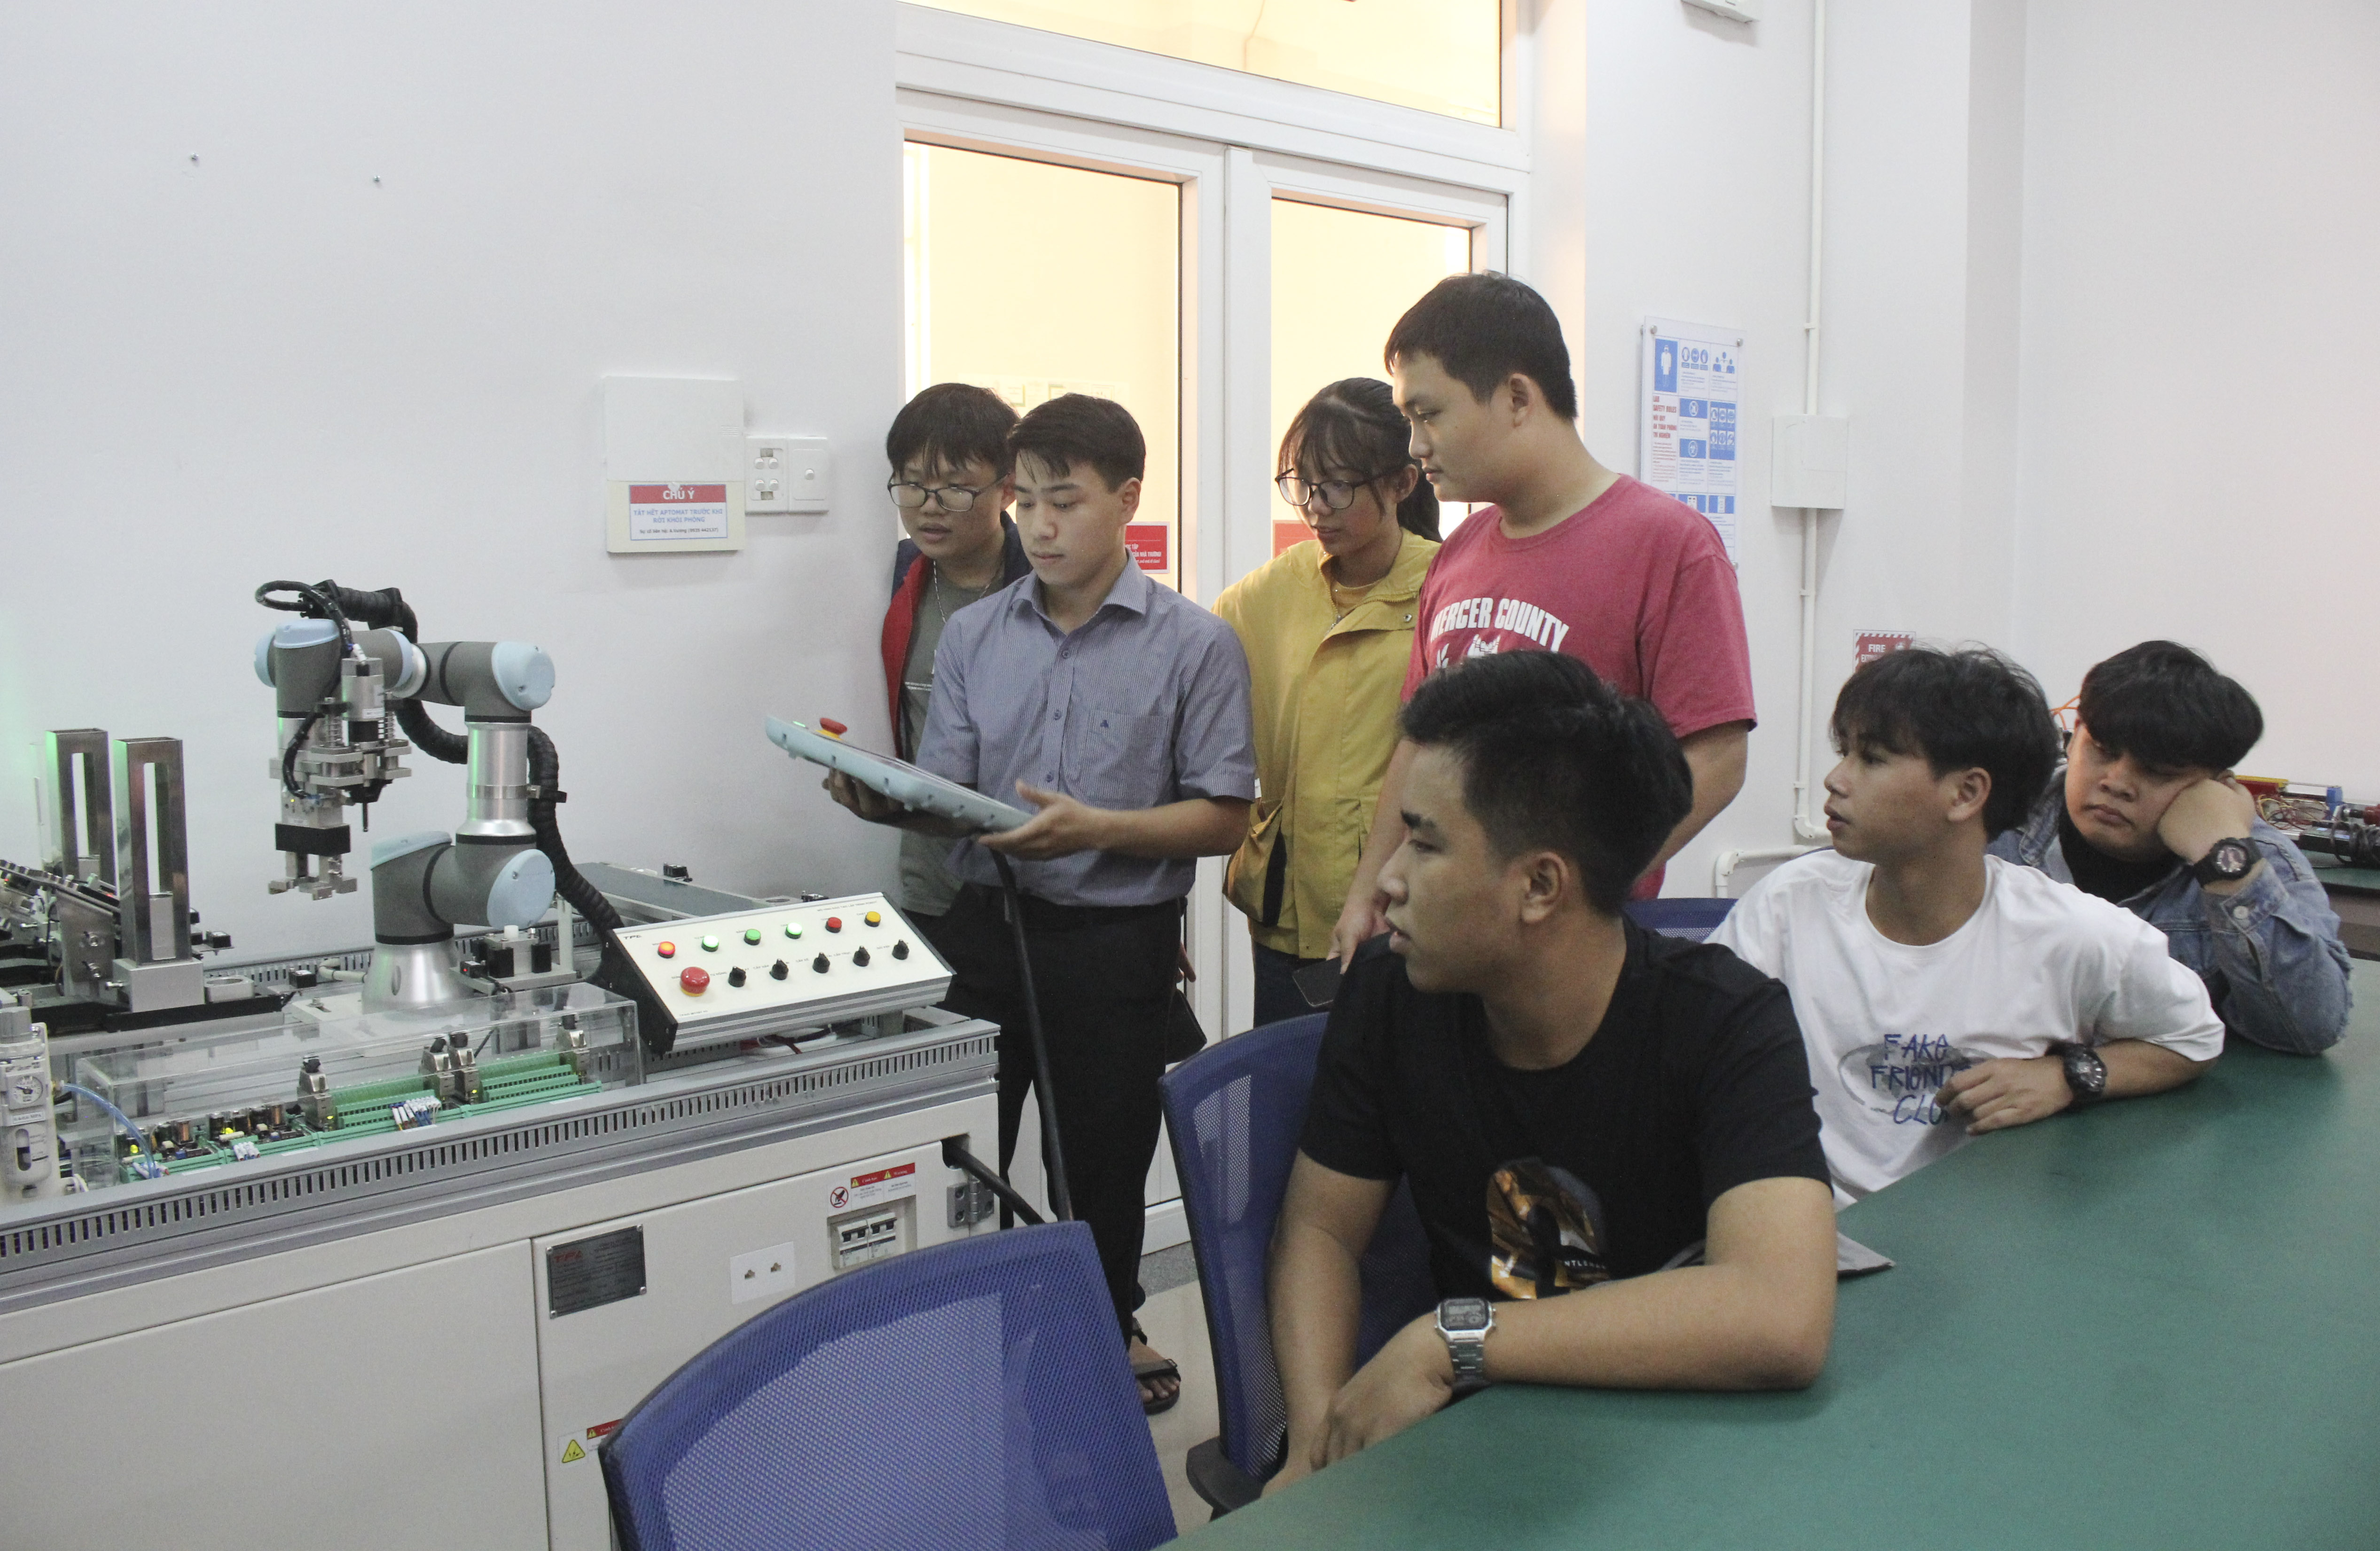 Pupils learning about the models and robots at the Duy Tan University